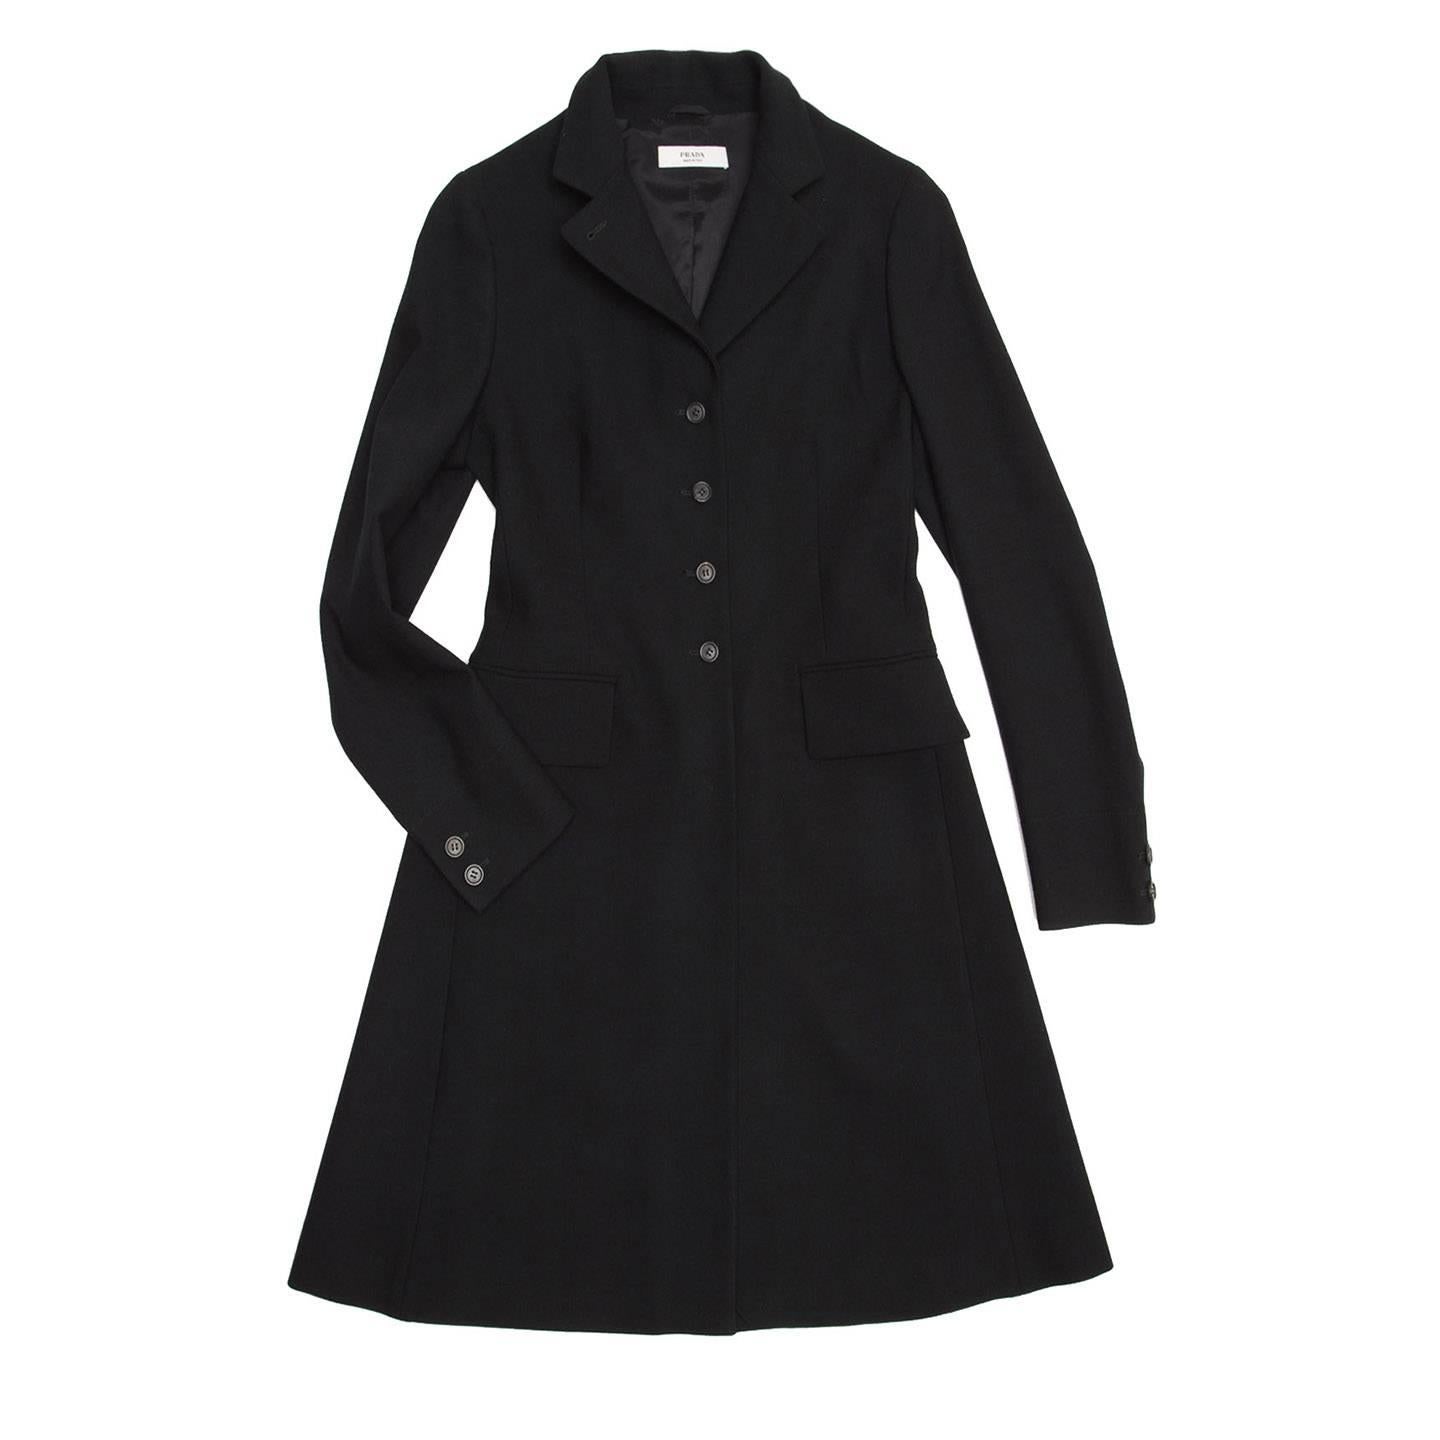 Black wool english riding vintage style coat, single breasted with small notched collar and front flap pockets. The fit is tight at top part and sleeves, while it is wider at skirt part.

Size  44 Italian sizing

Condition  Excellent: worn once